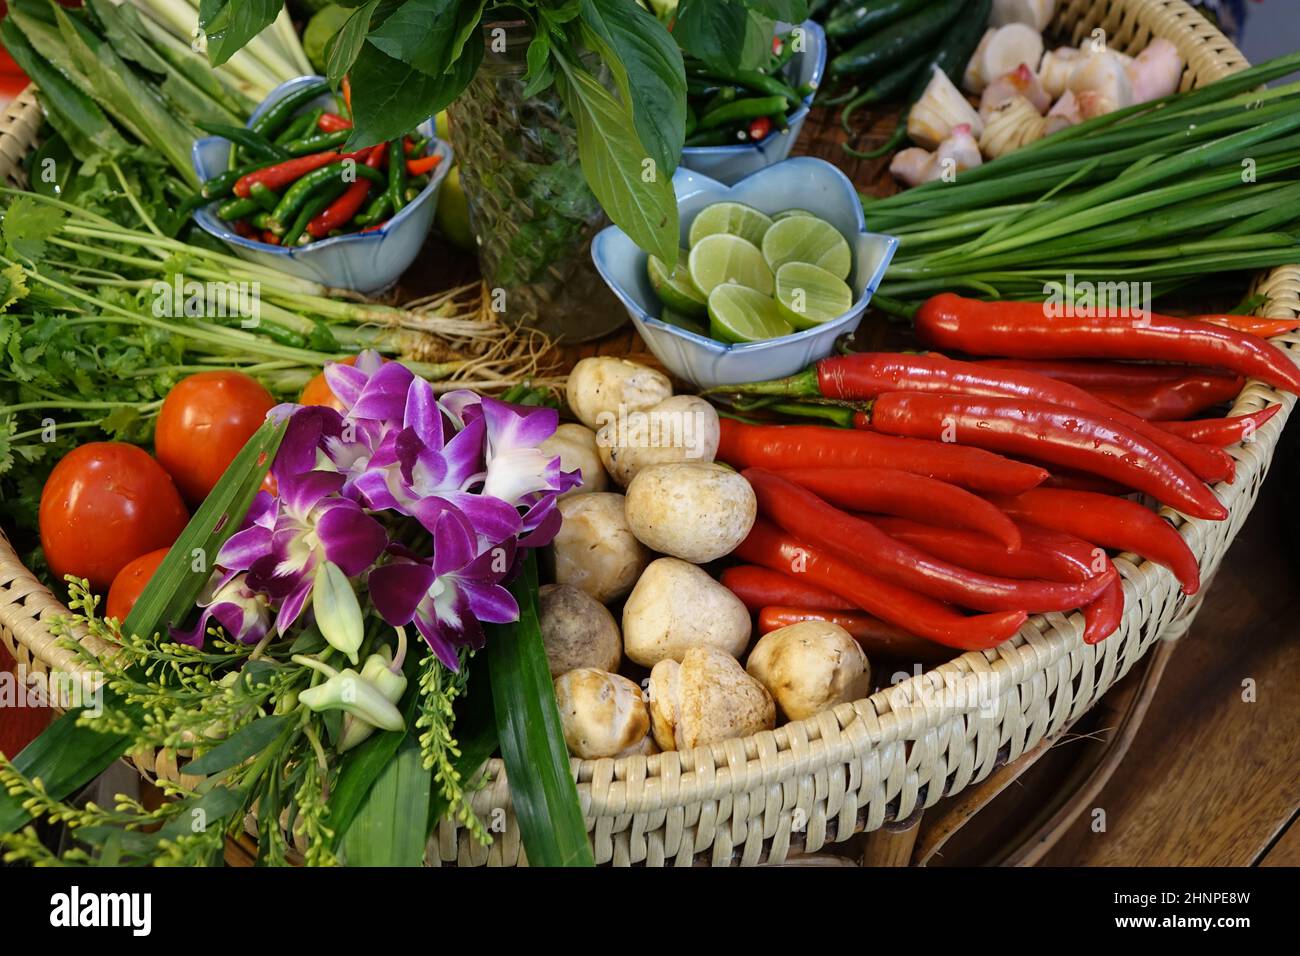 Colourful, healthy and fresh fruits and vegetables in wooden basket, focus on top of the violet flowers, Bangkok, Thailand Stock Photo